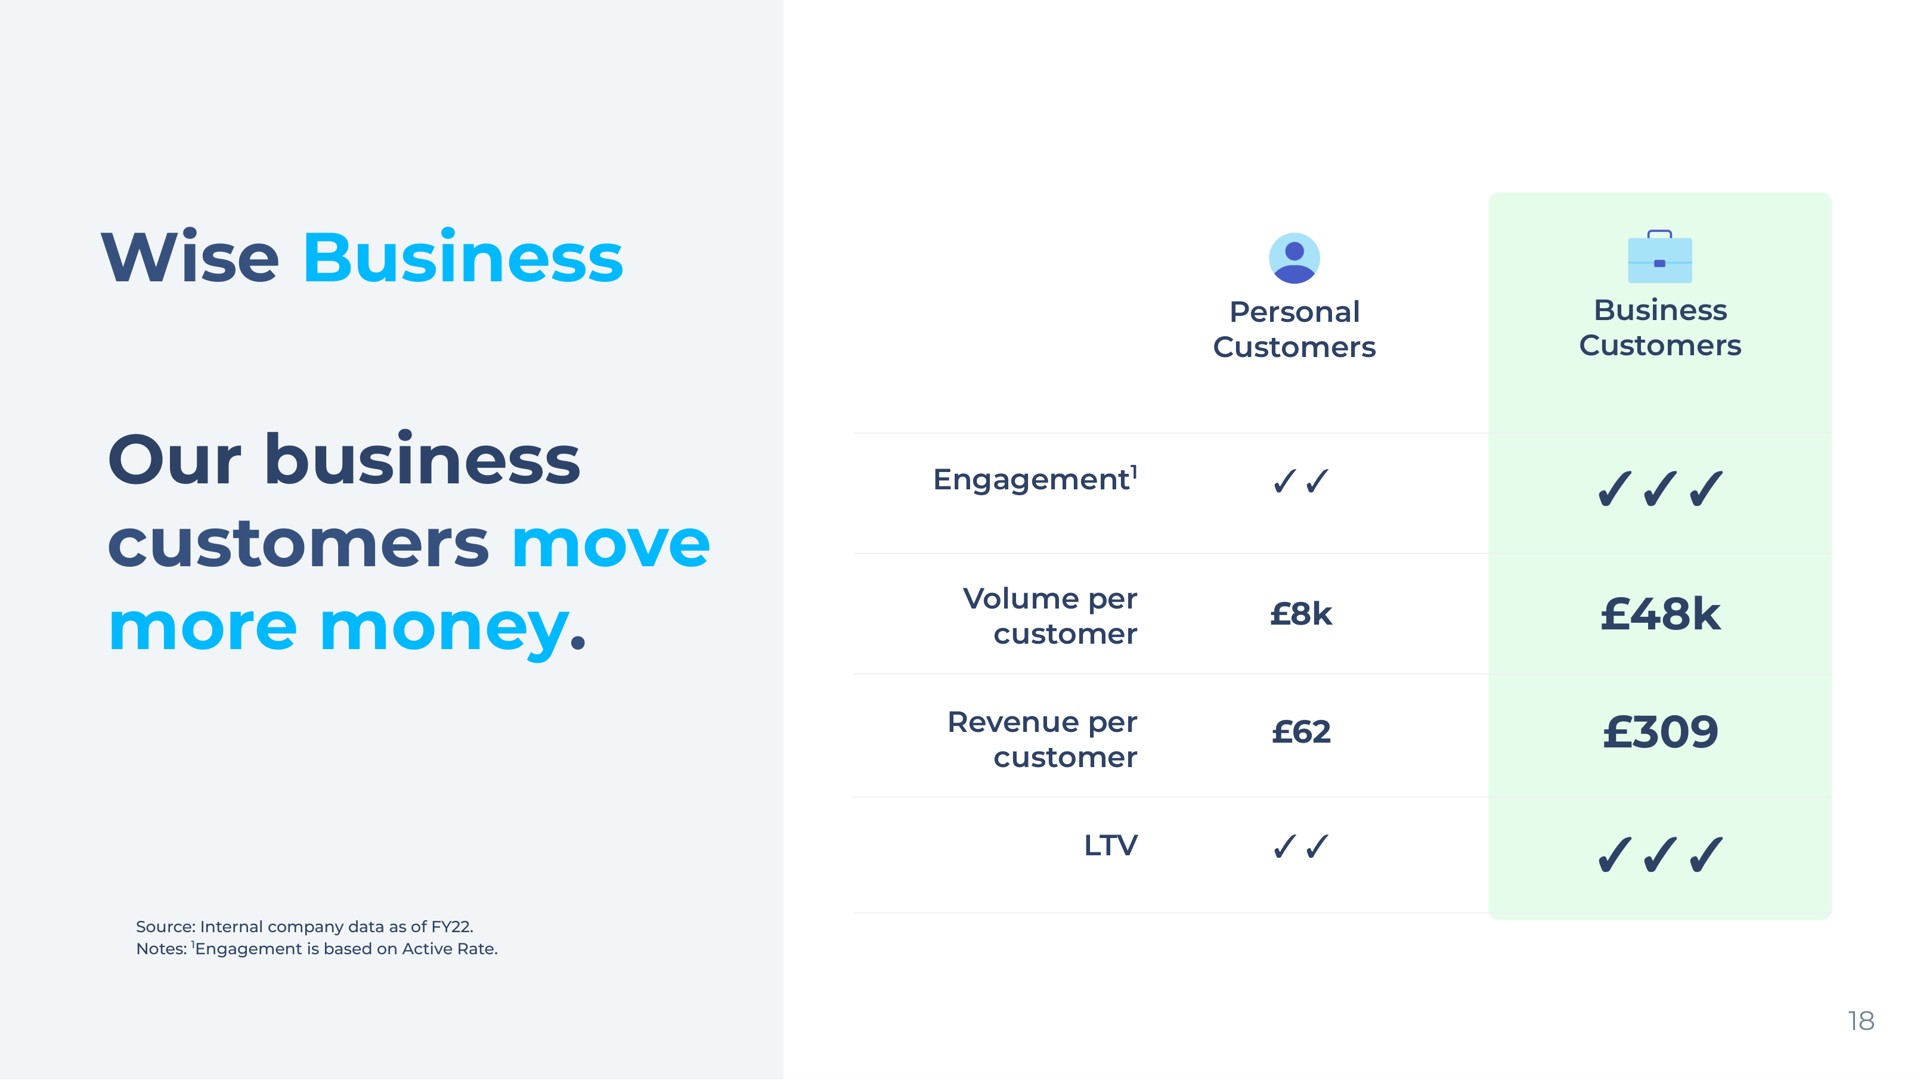 wise business our business customers move more money personal customers business customers engagement volume per customer revenue per customer | Wise